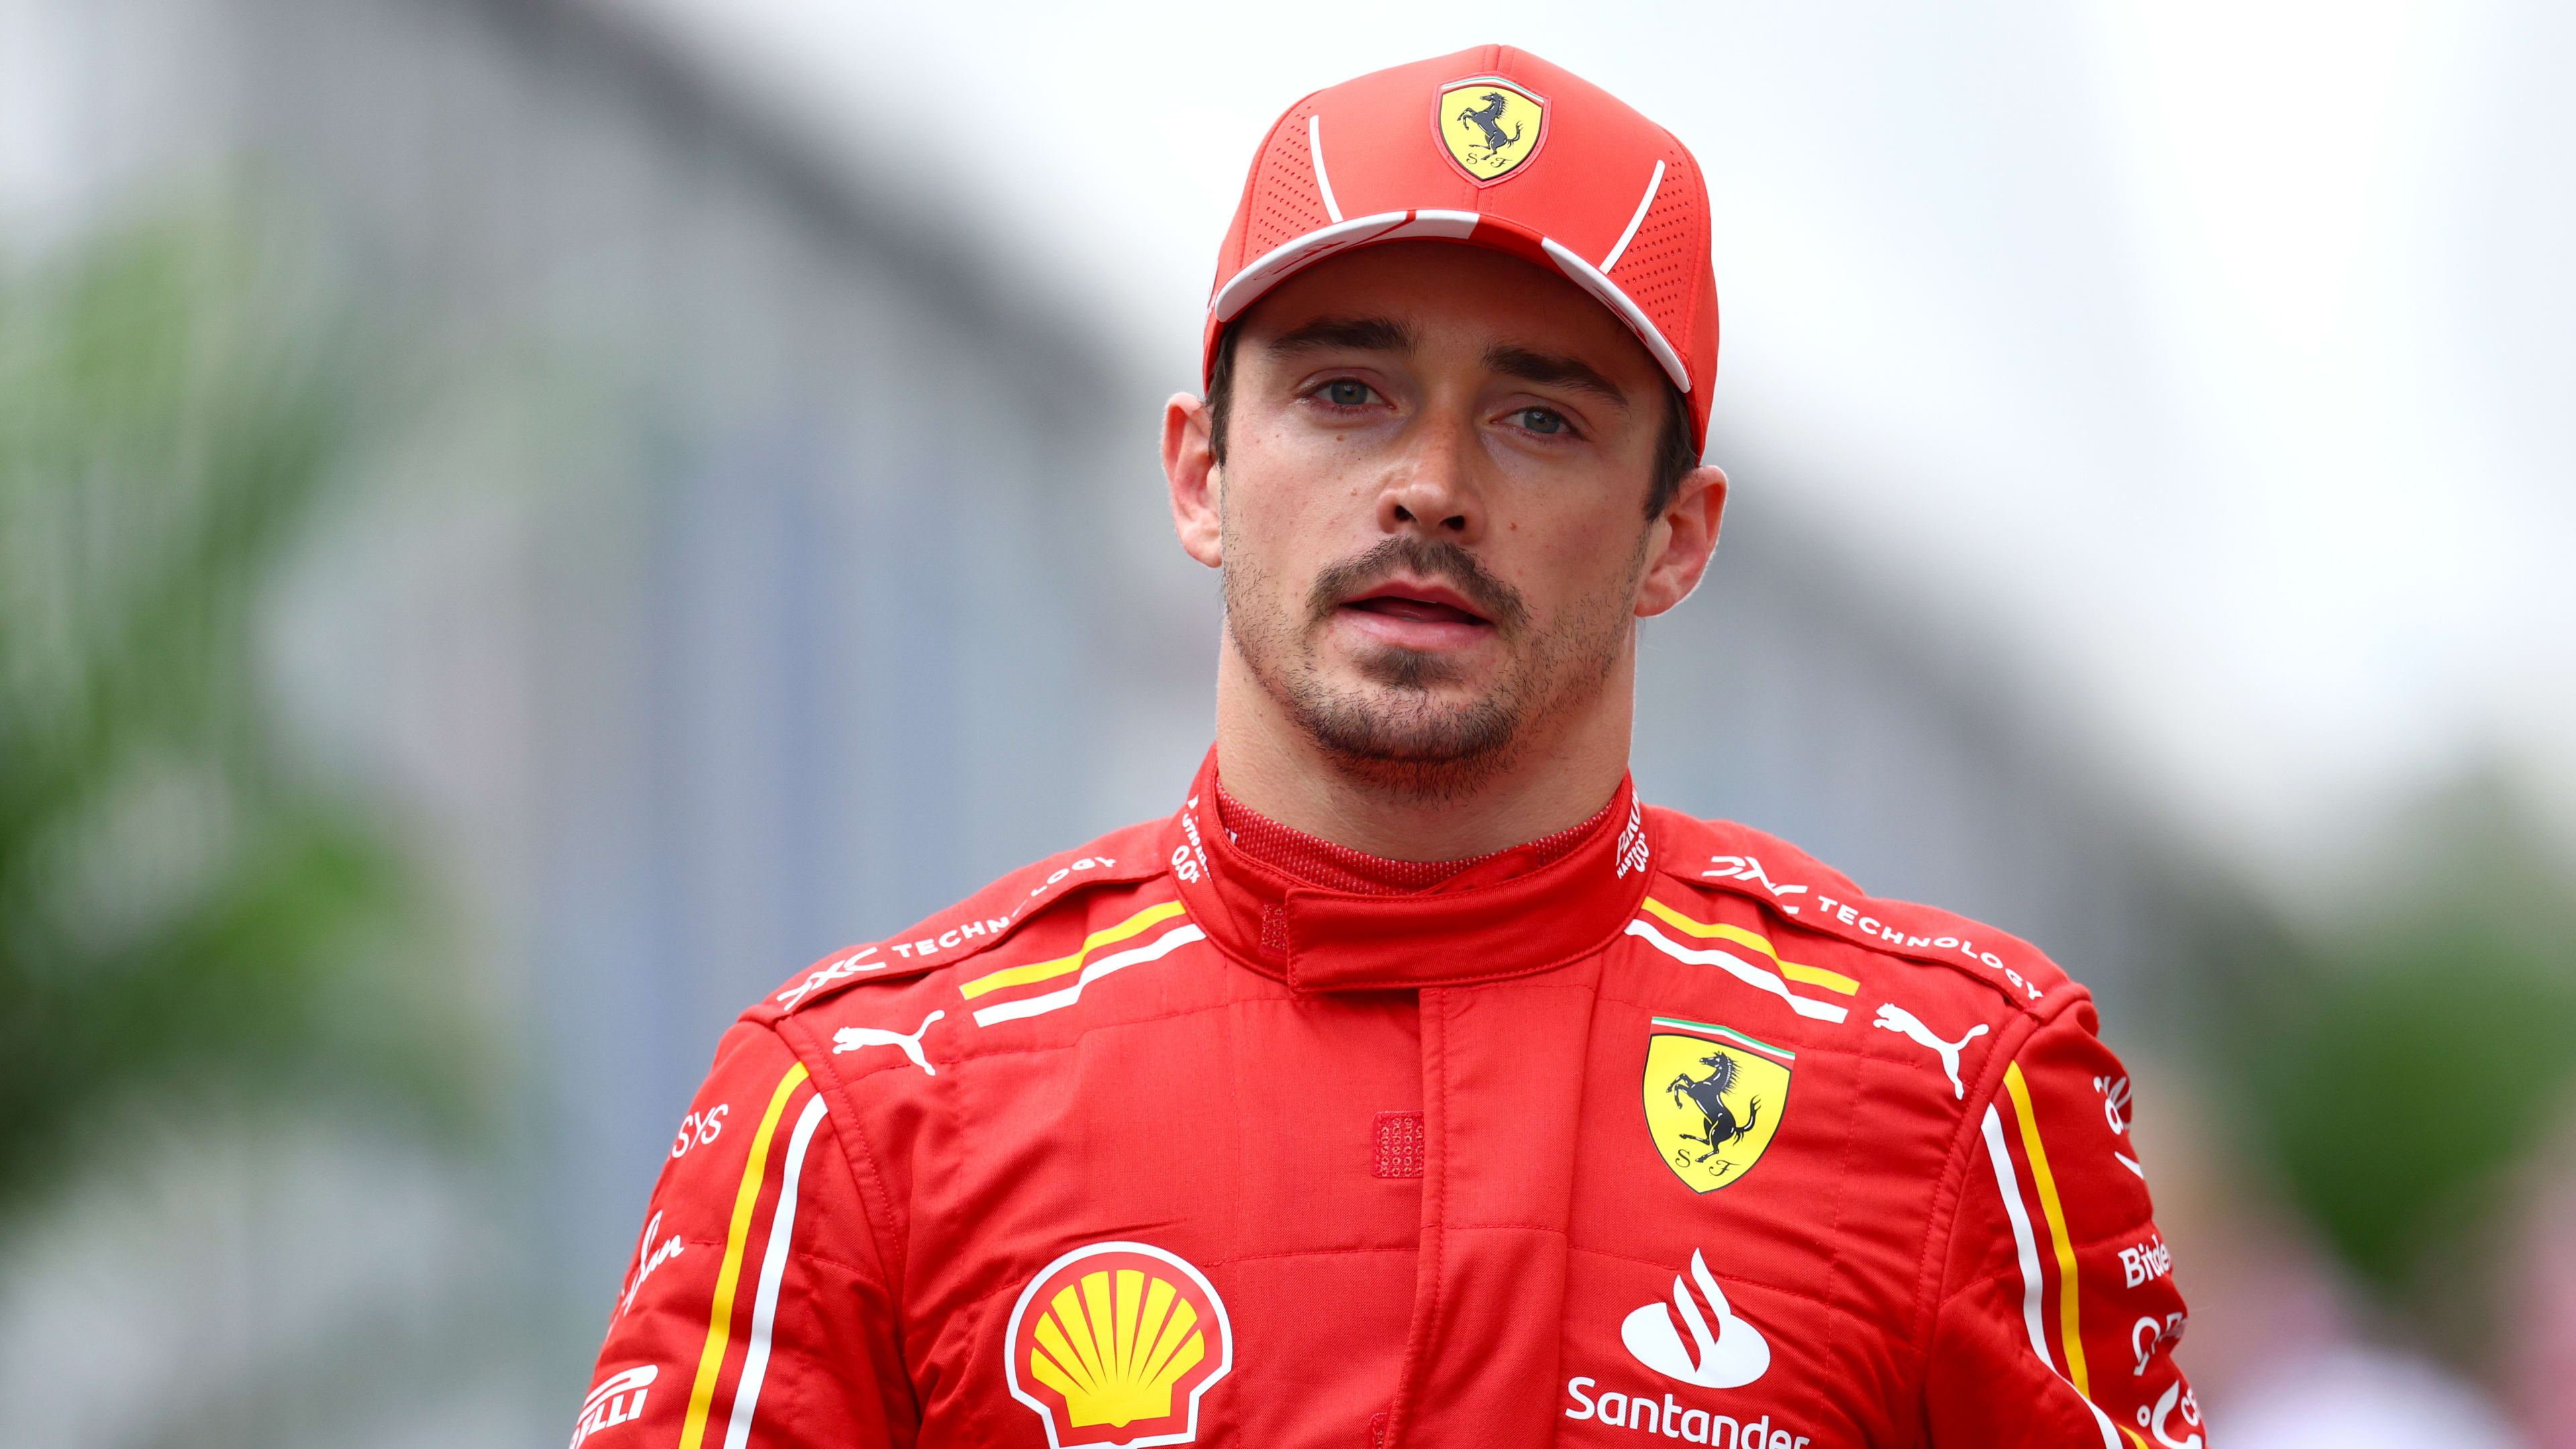 Leclerc ‘paid the price’ for poor qualifying in Japanese GP as he vows to work on struggles